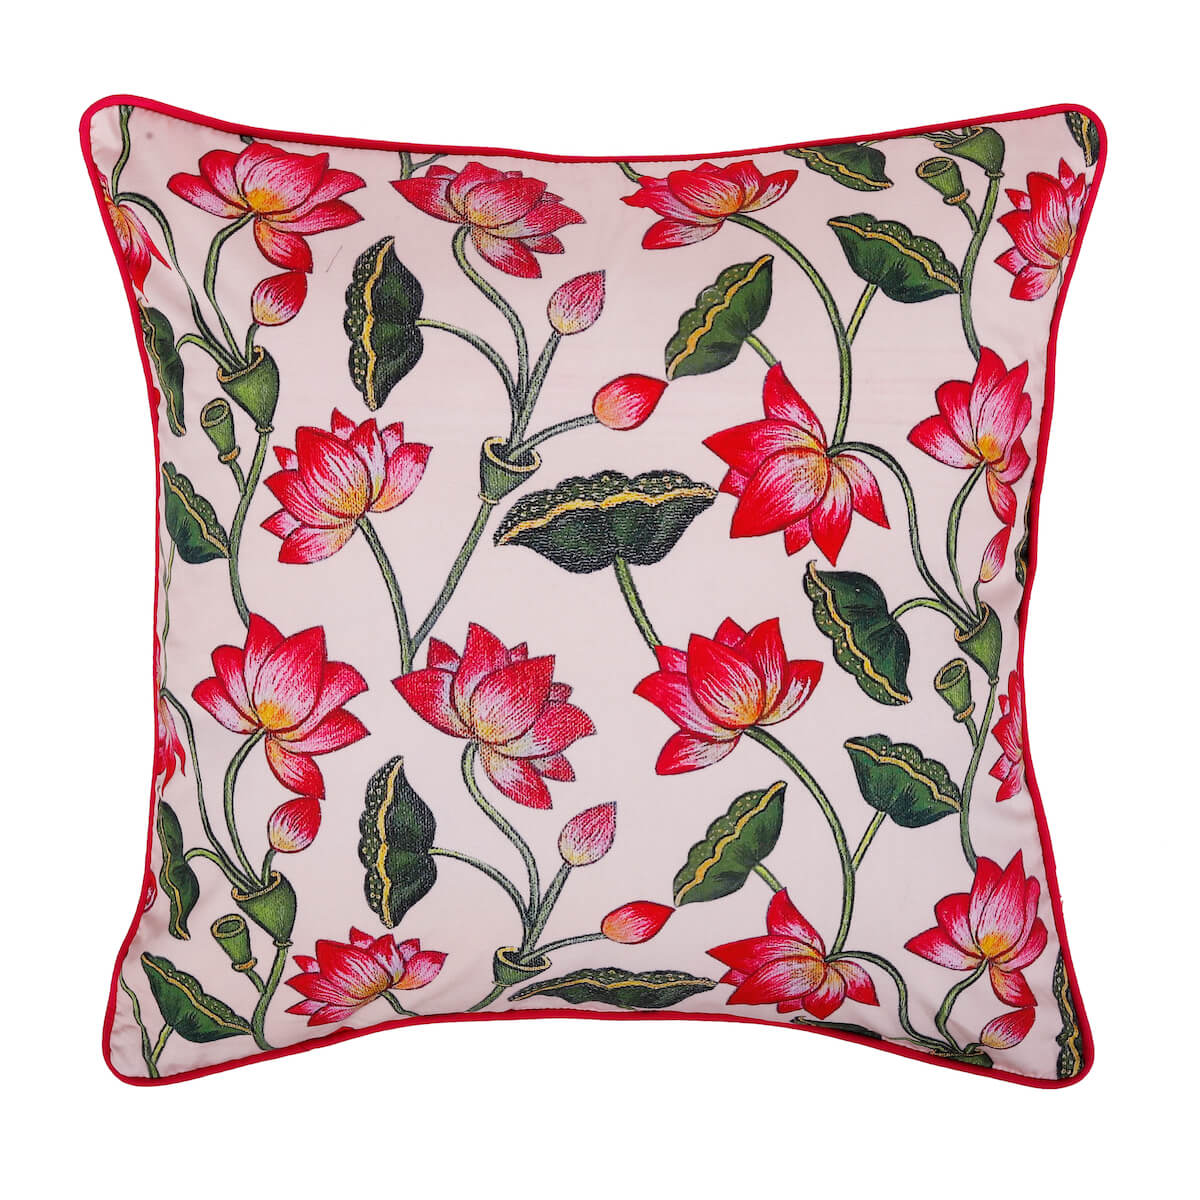 Bright Pink Lotus Print Floral Cotton Cream Cushion Cover Size 16"x16"